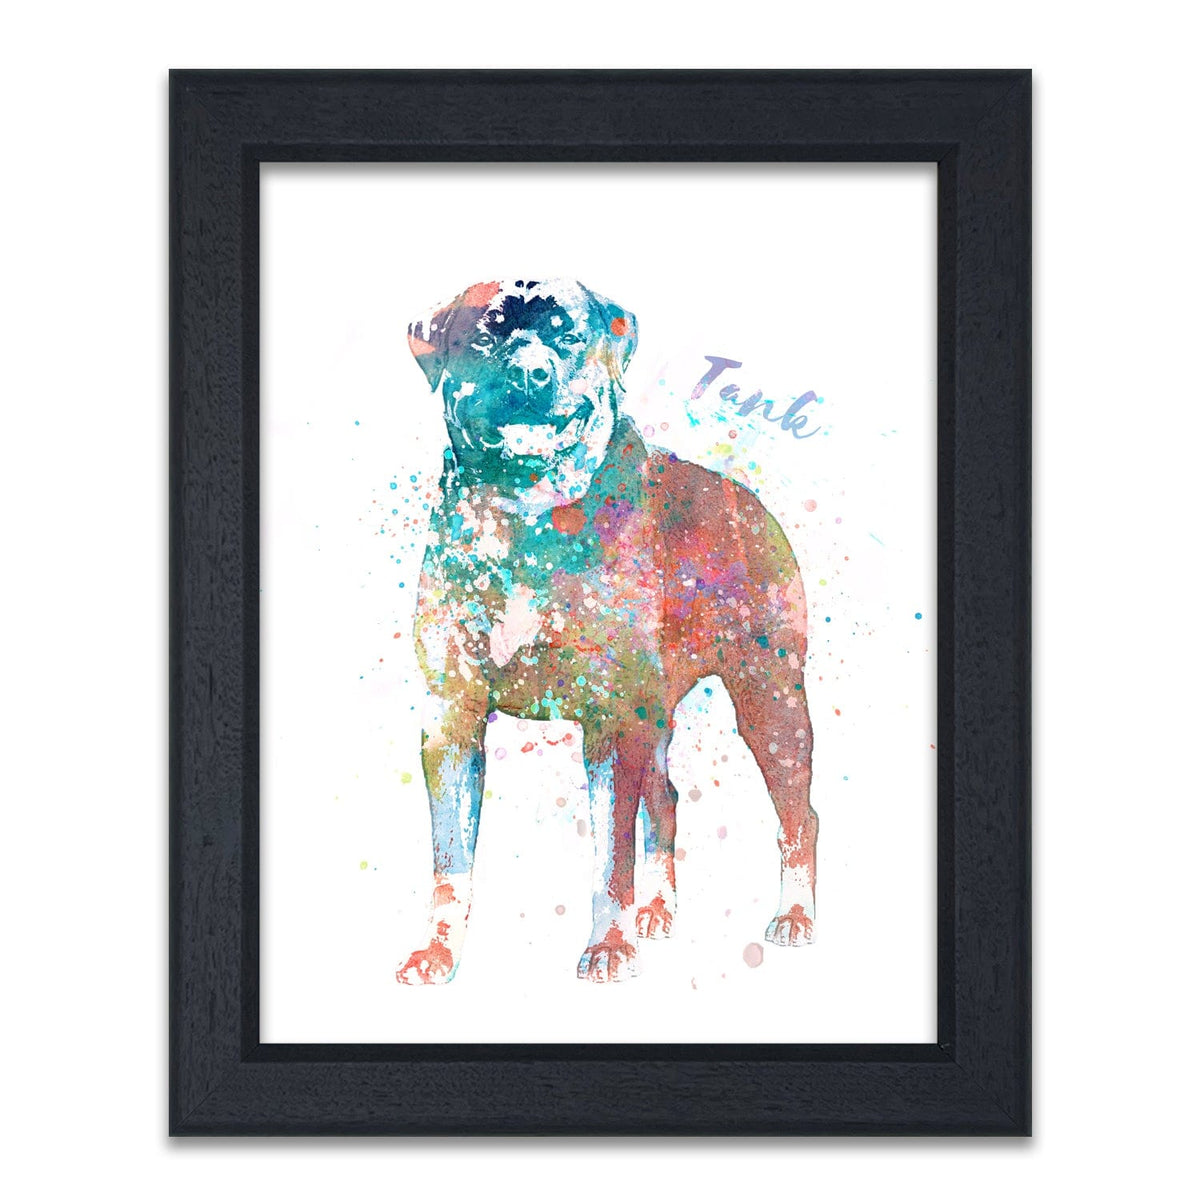 Framed Rottweiler Pet Portrait from Personal-Prints